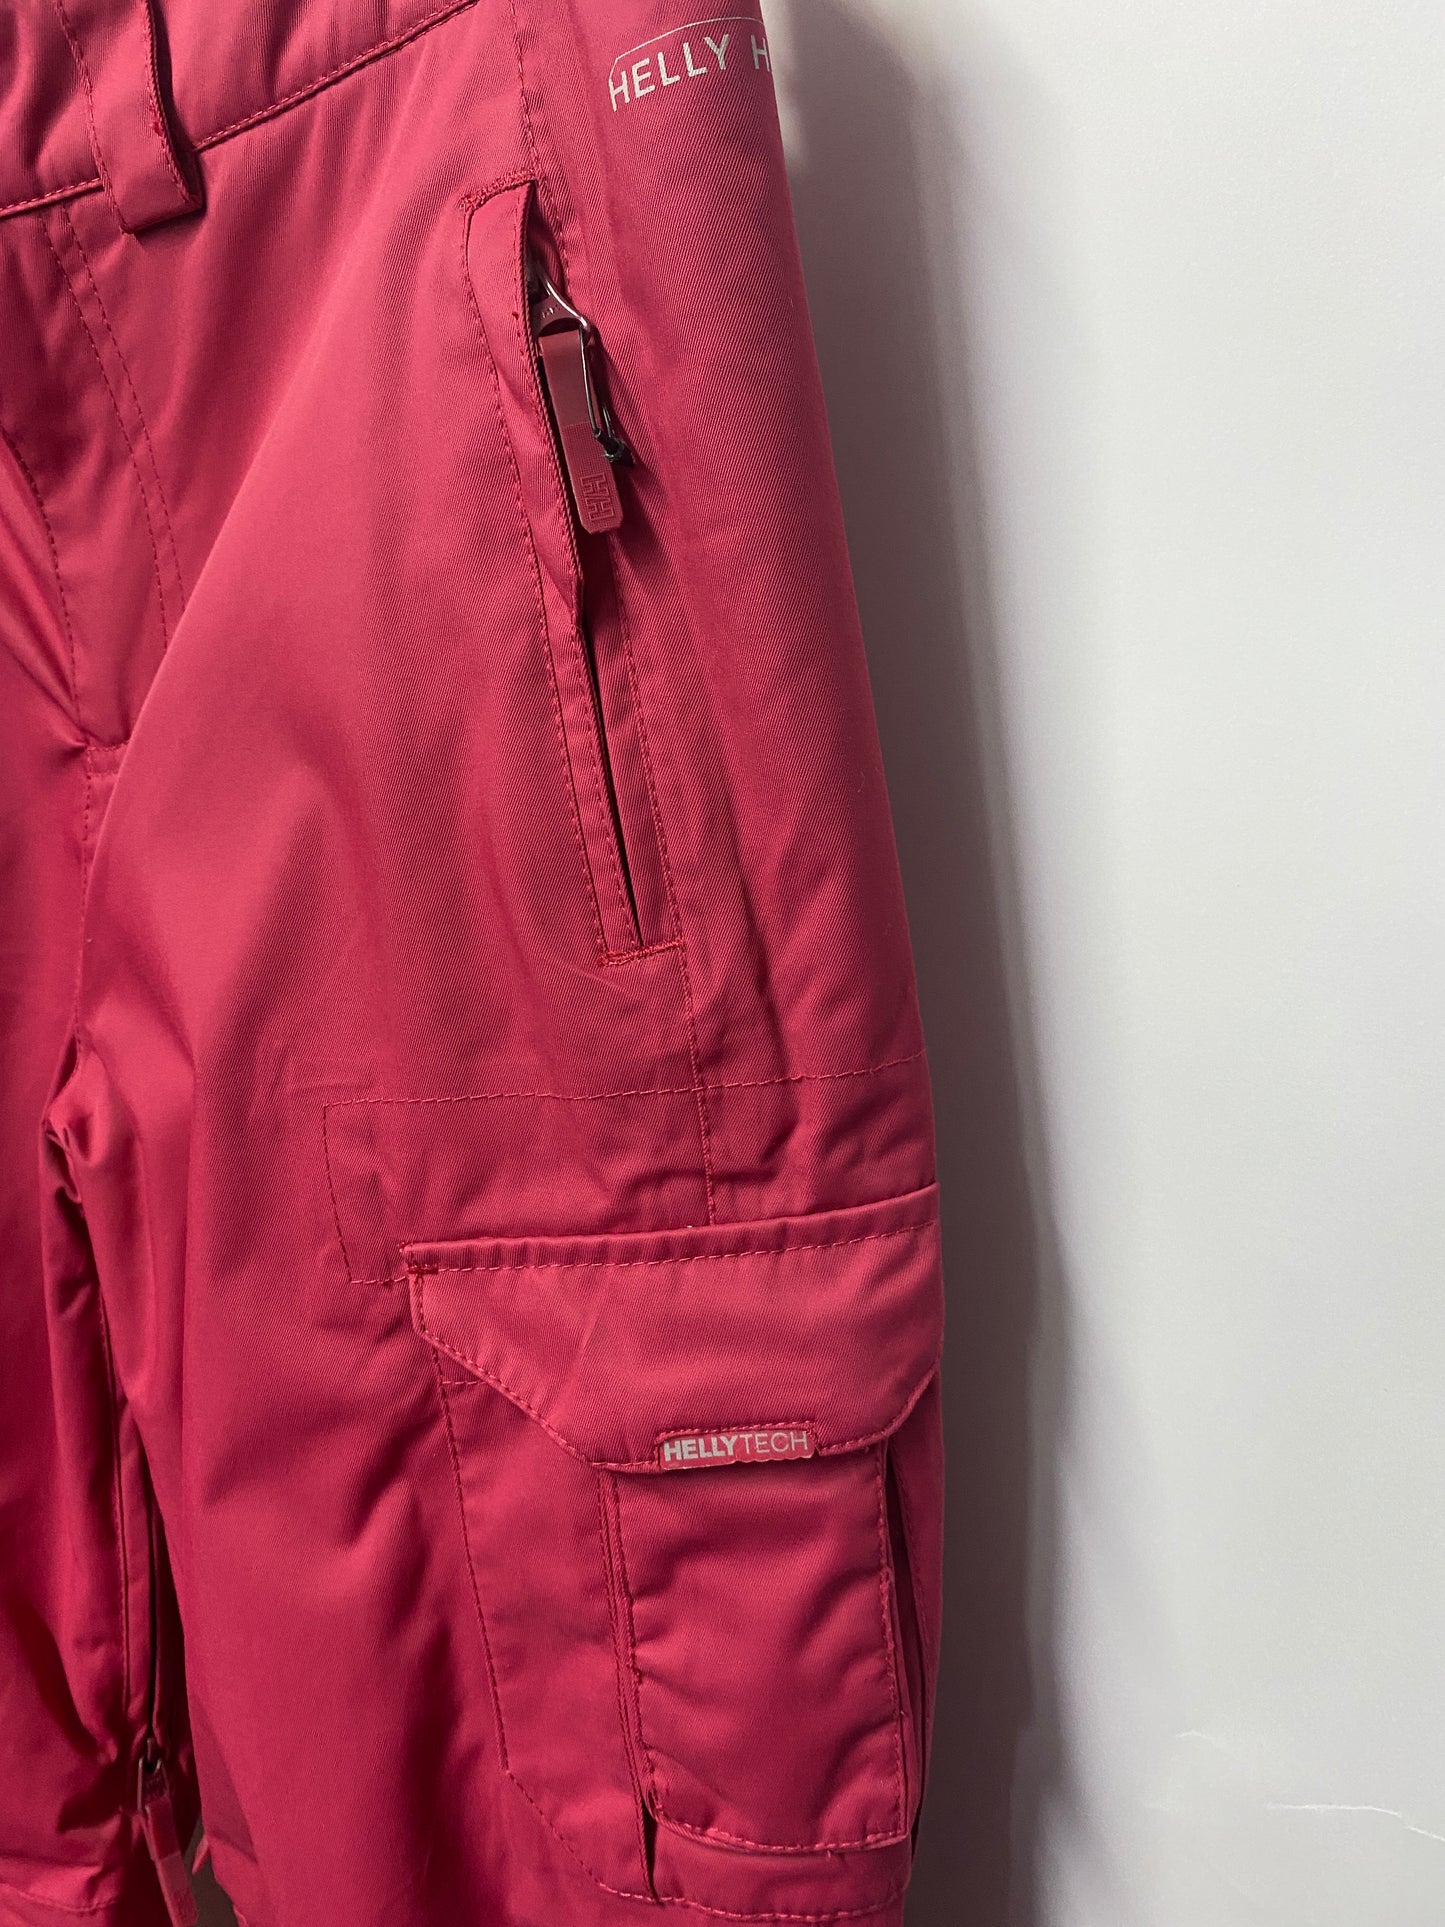 Helly Hansen Pink Insulated Waterproof Salopettes Age 12